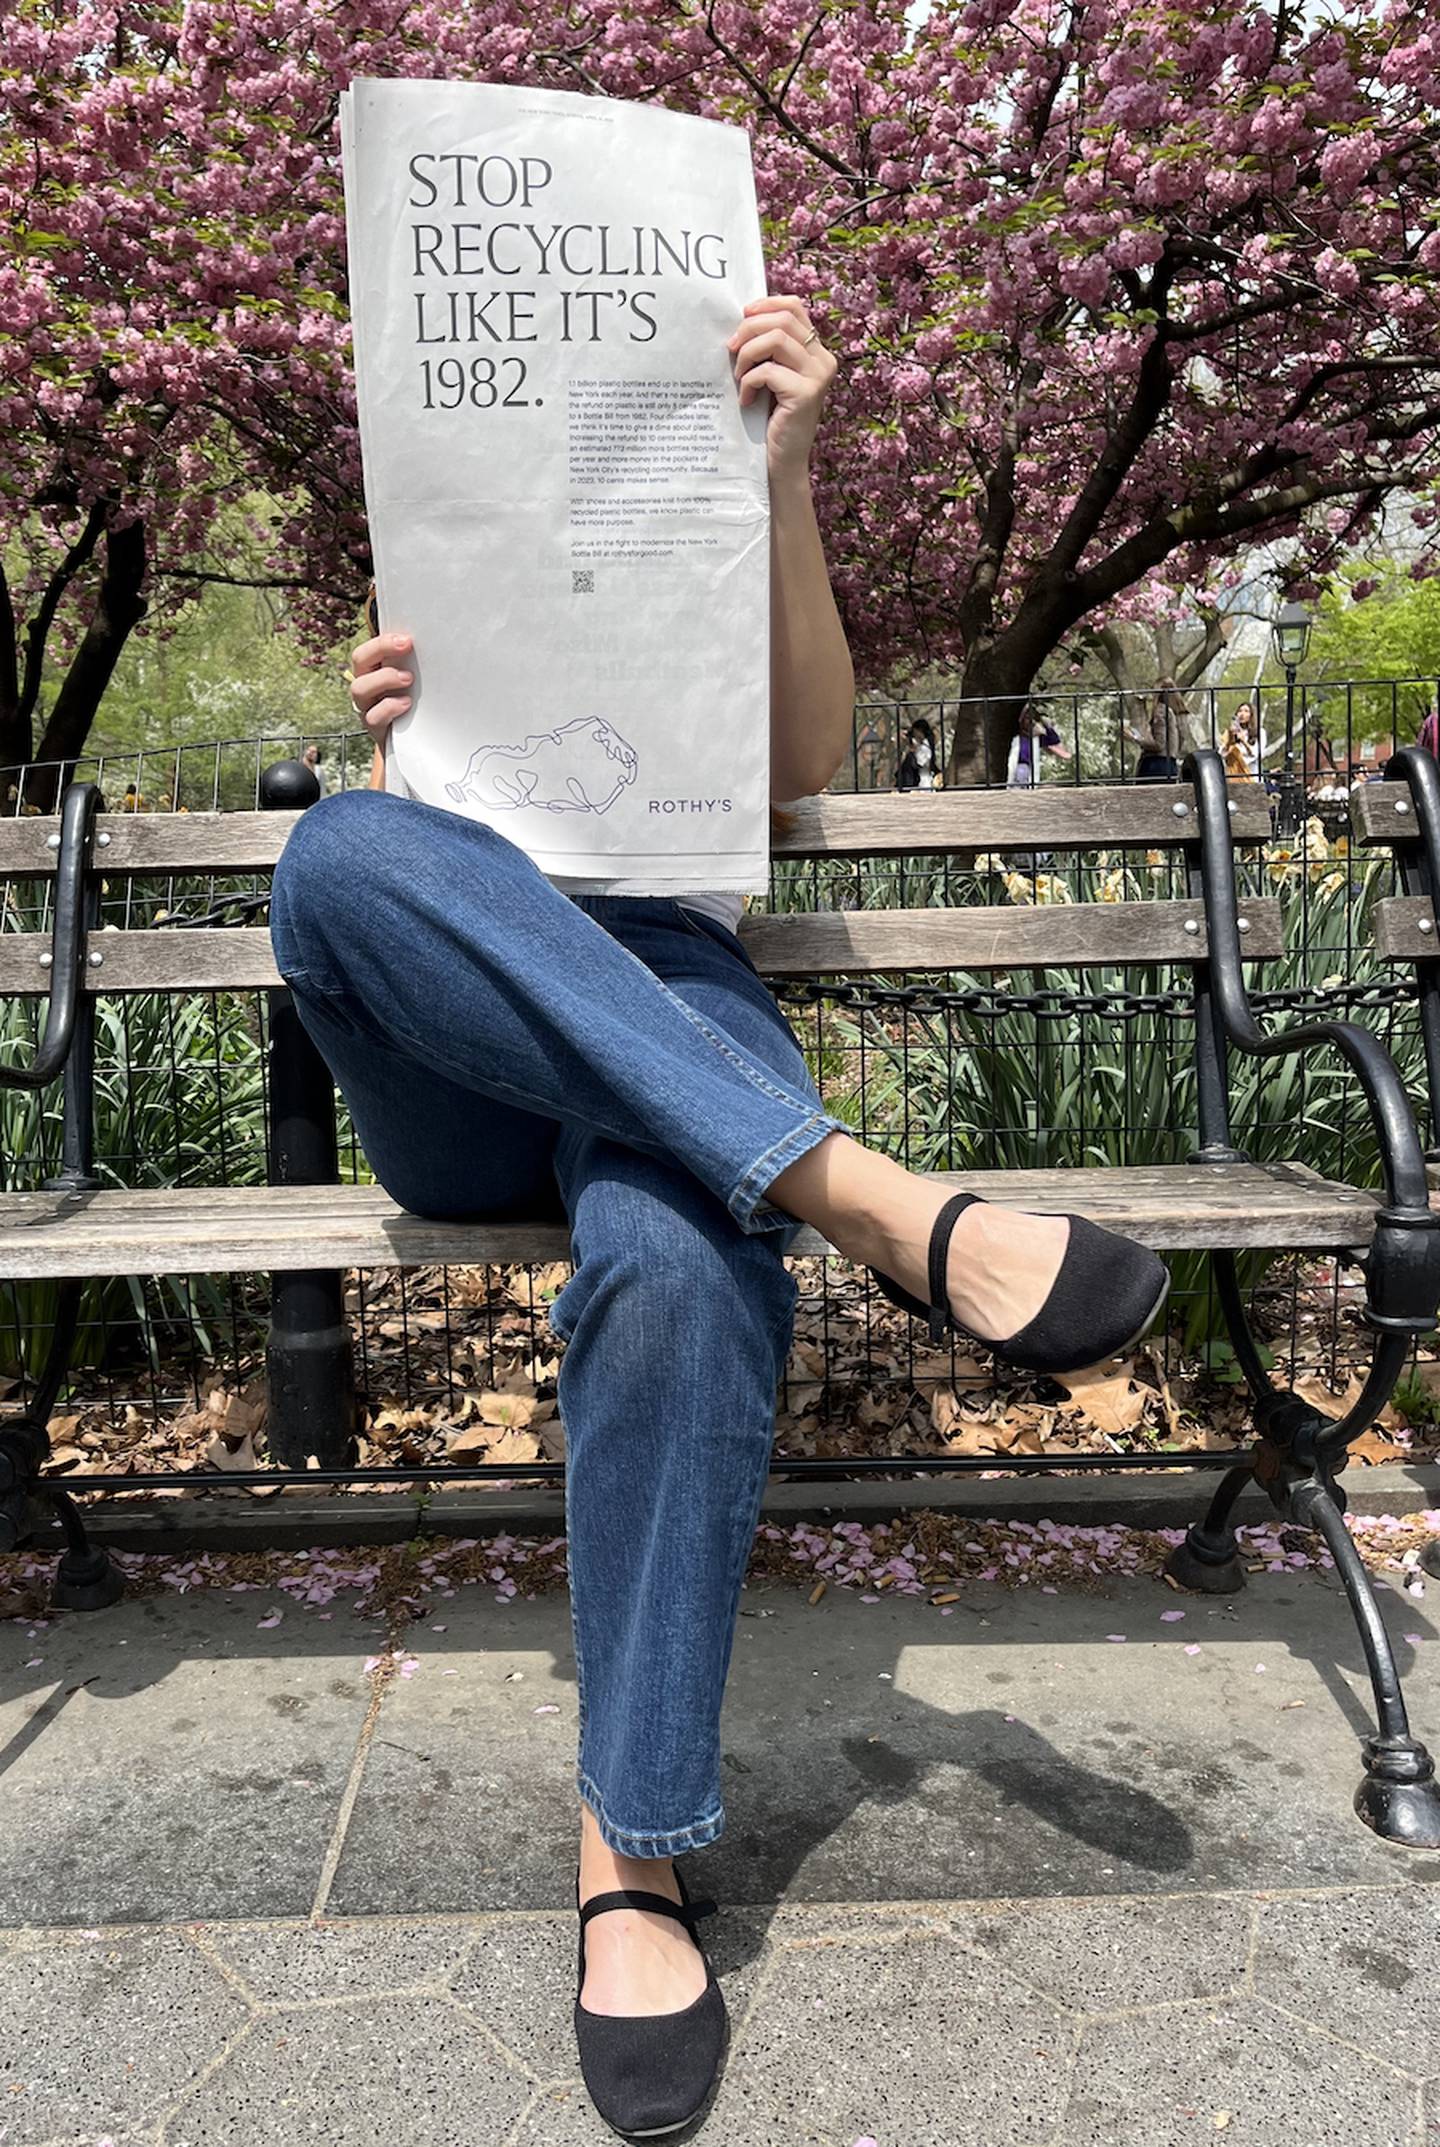 A woman sits under a cherry blossom tree wearing Rothy's shoes and reading a paper with an ad for the New York Bottle Bill.